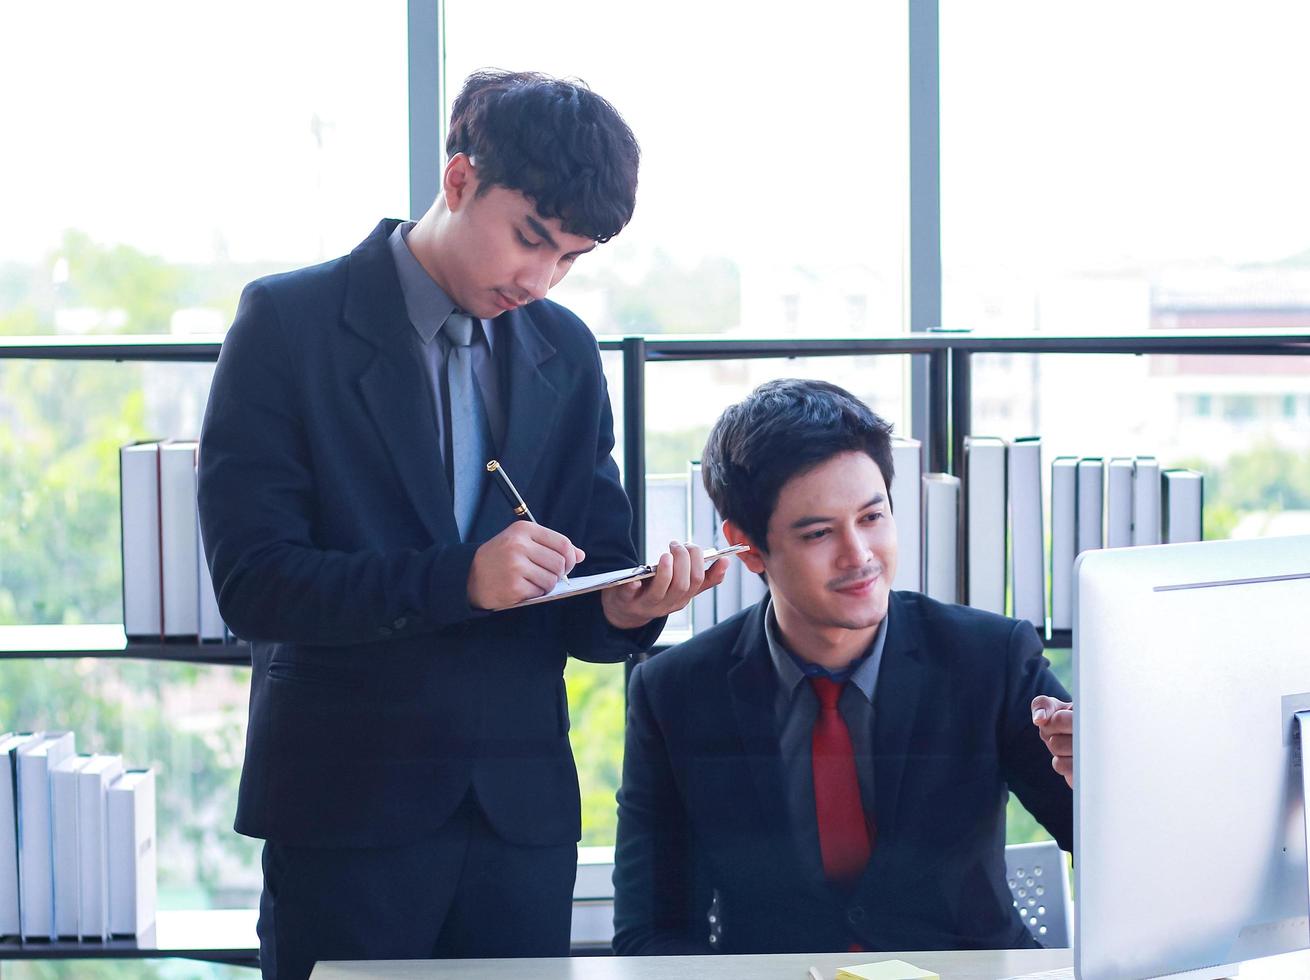 Two young business men sit and work on laptops in a modern office They are young, active businessmen photo